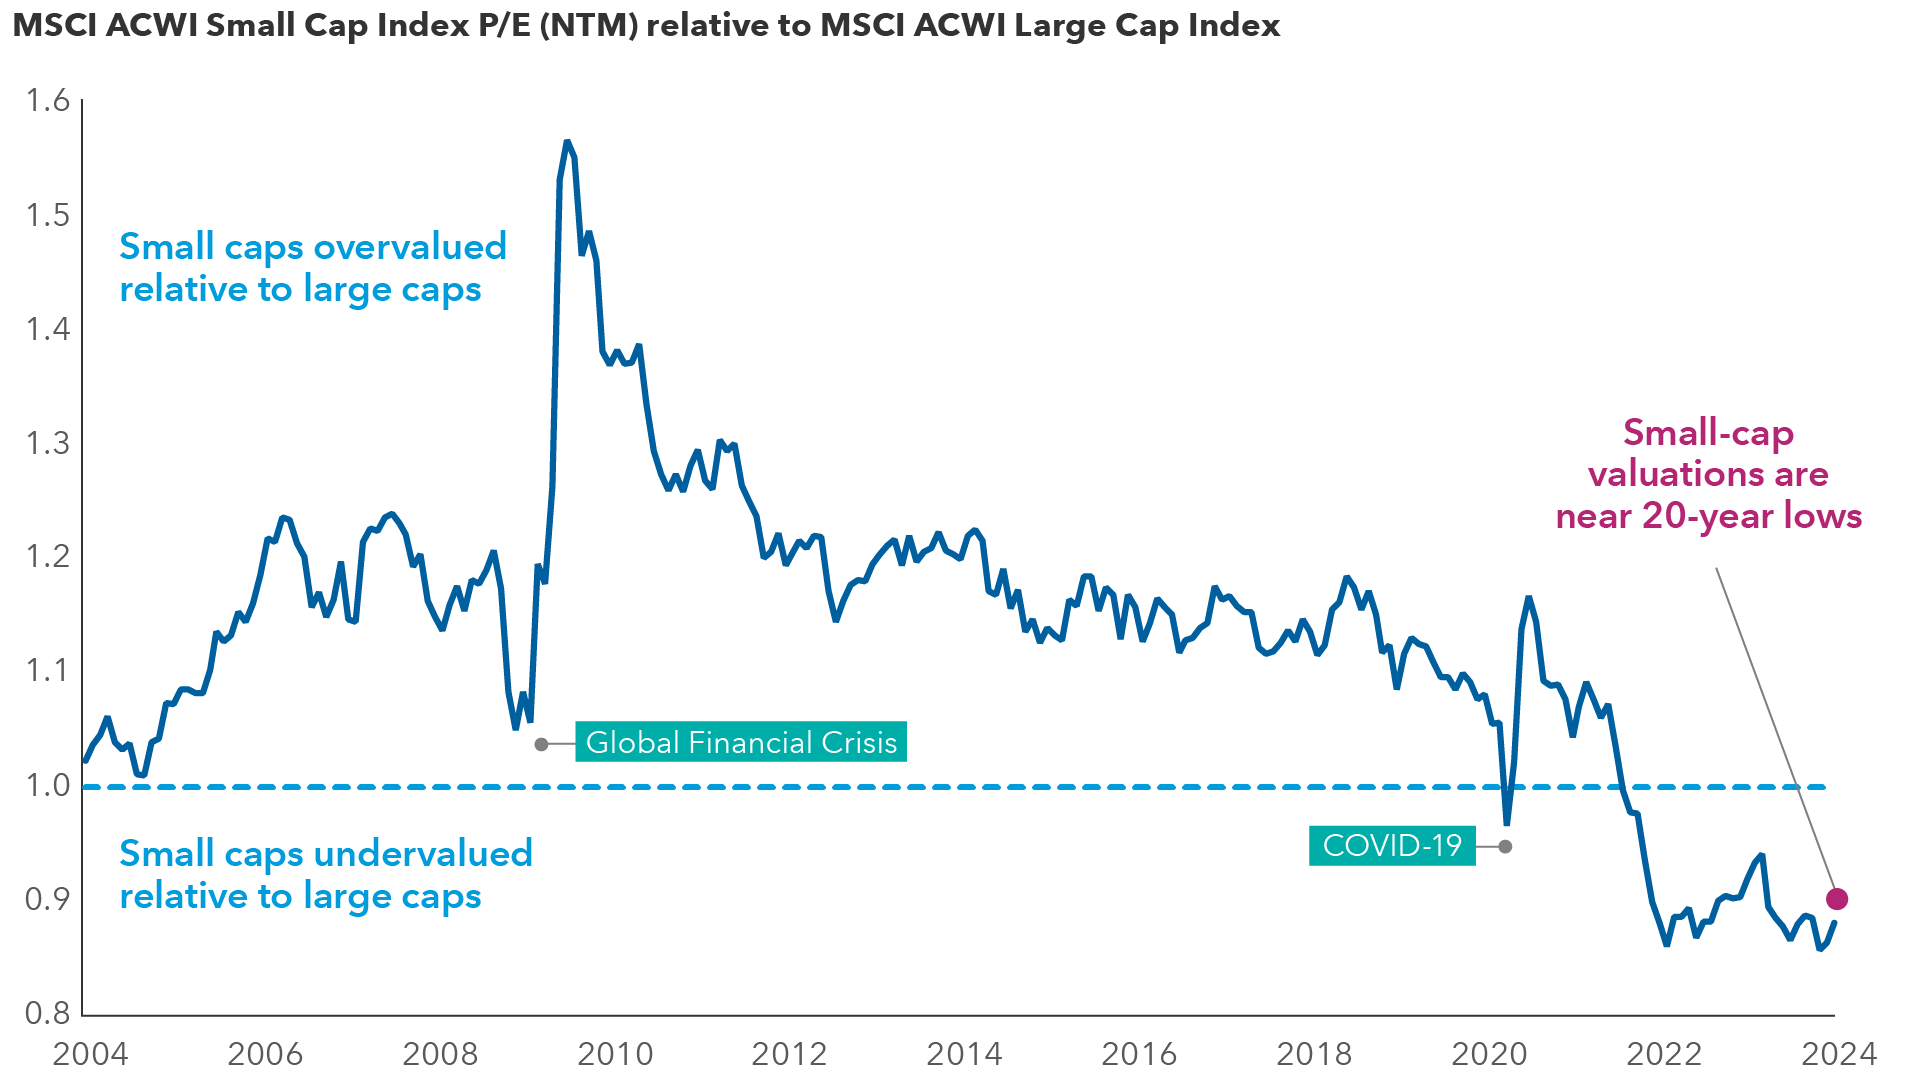 A line chart compares the MSCI All Country World Index (ACWI) Small Cap Index price-to-earnings (P/E) ratio over the next 12 months (NTM) to the MSCI ACWI Large Cap Index from December 31, 2003, to May 31, 2024. The y-axis shows relative P/E ratios ranging from 0.8 to 1.6, and the x-axis represents years. The line starts near 1.0 in 2004 and fluctuates, dipping back toward 1.0 during the Great Financial Crisis, and peaking at 1.57 around 2009. The line then declines with a significant dip during the COVID-19 pandemic, reaching its lowest point near 2024, marked “Small-cap valuations are near 20-year lows.” Two annotations indicate where small caps were overvalued relative to large caps (above 1.0) and periods where they were undervalued (below 1.0).